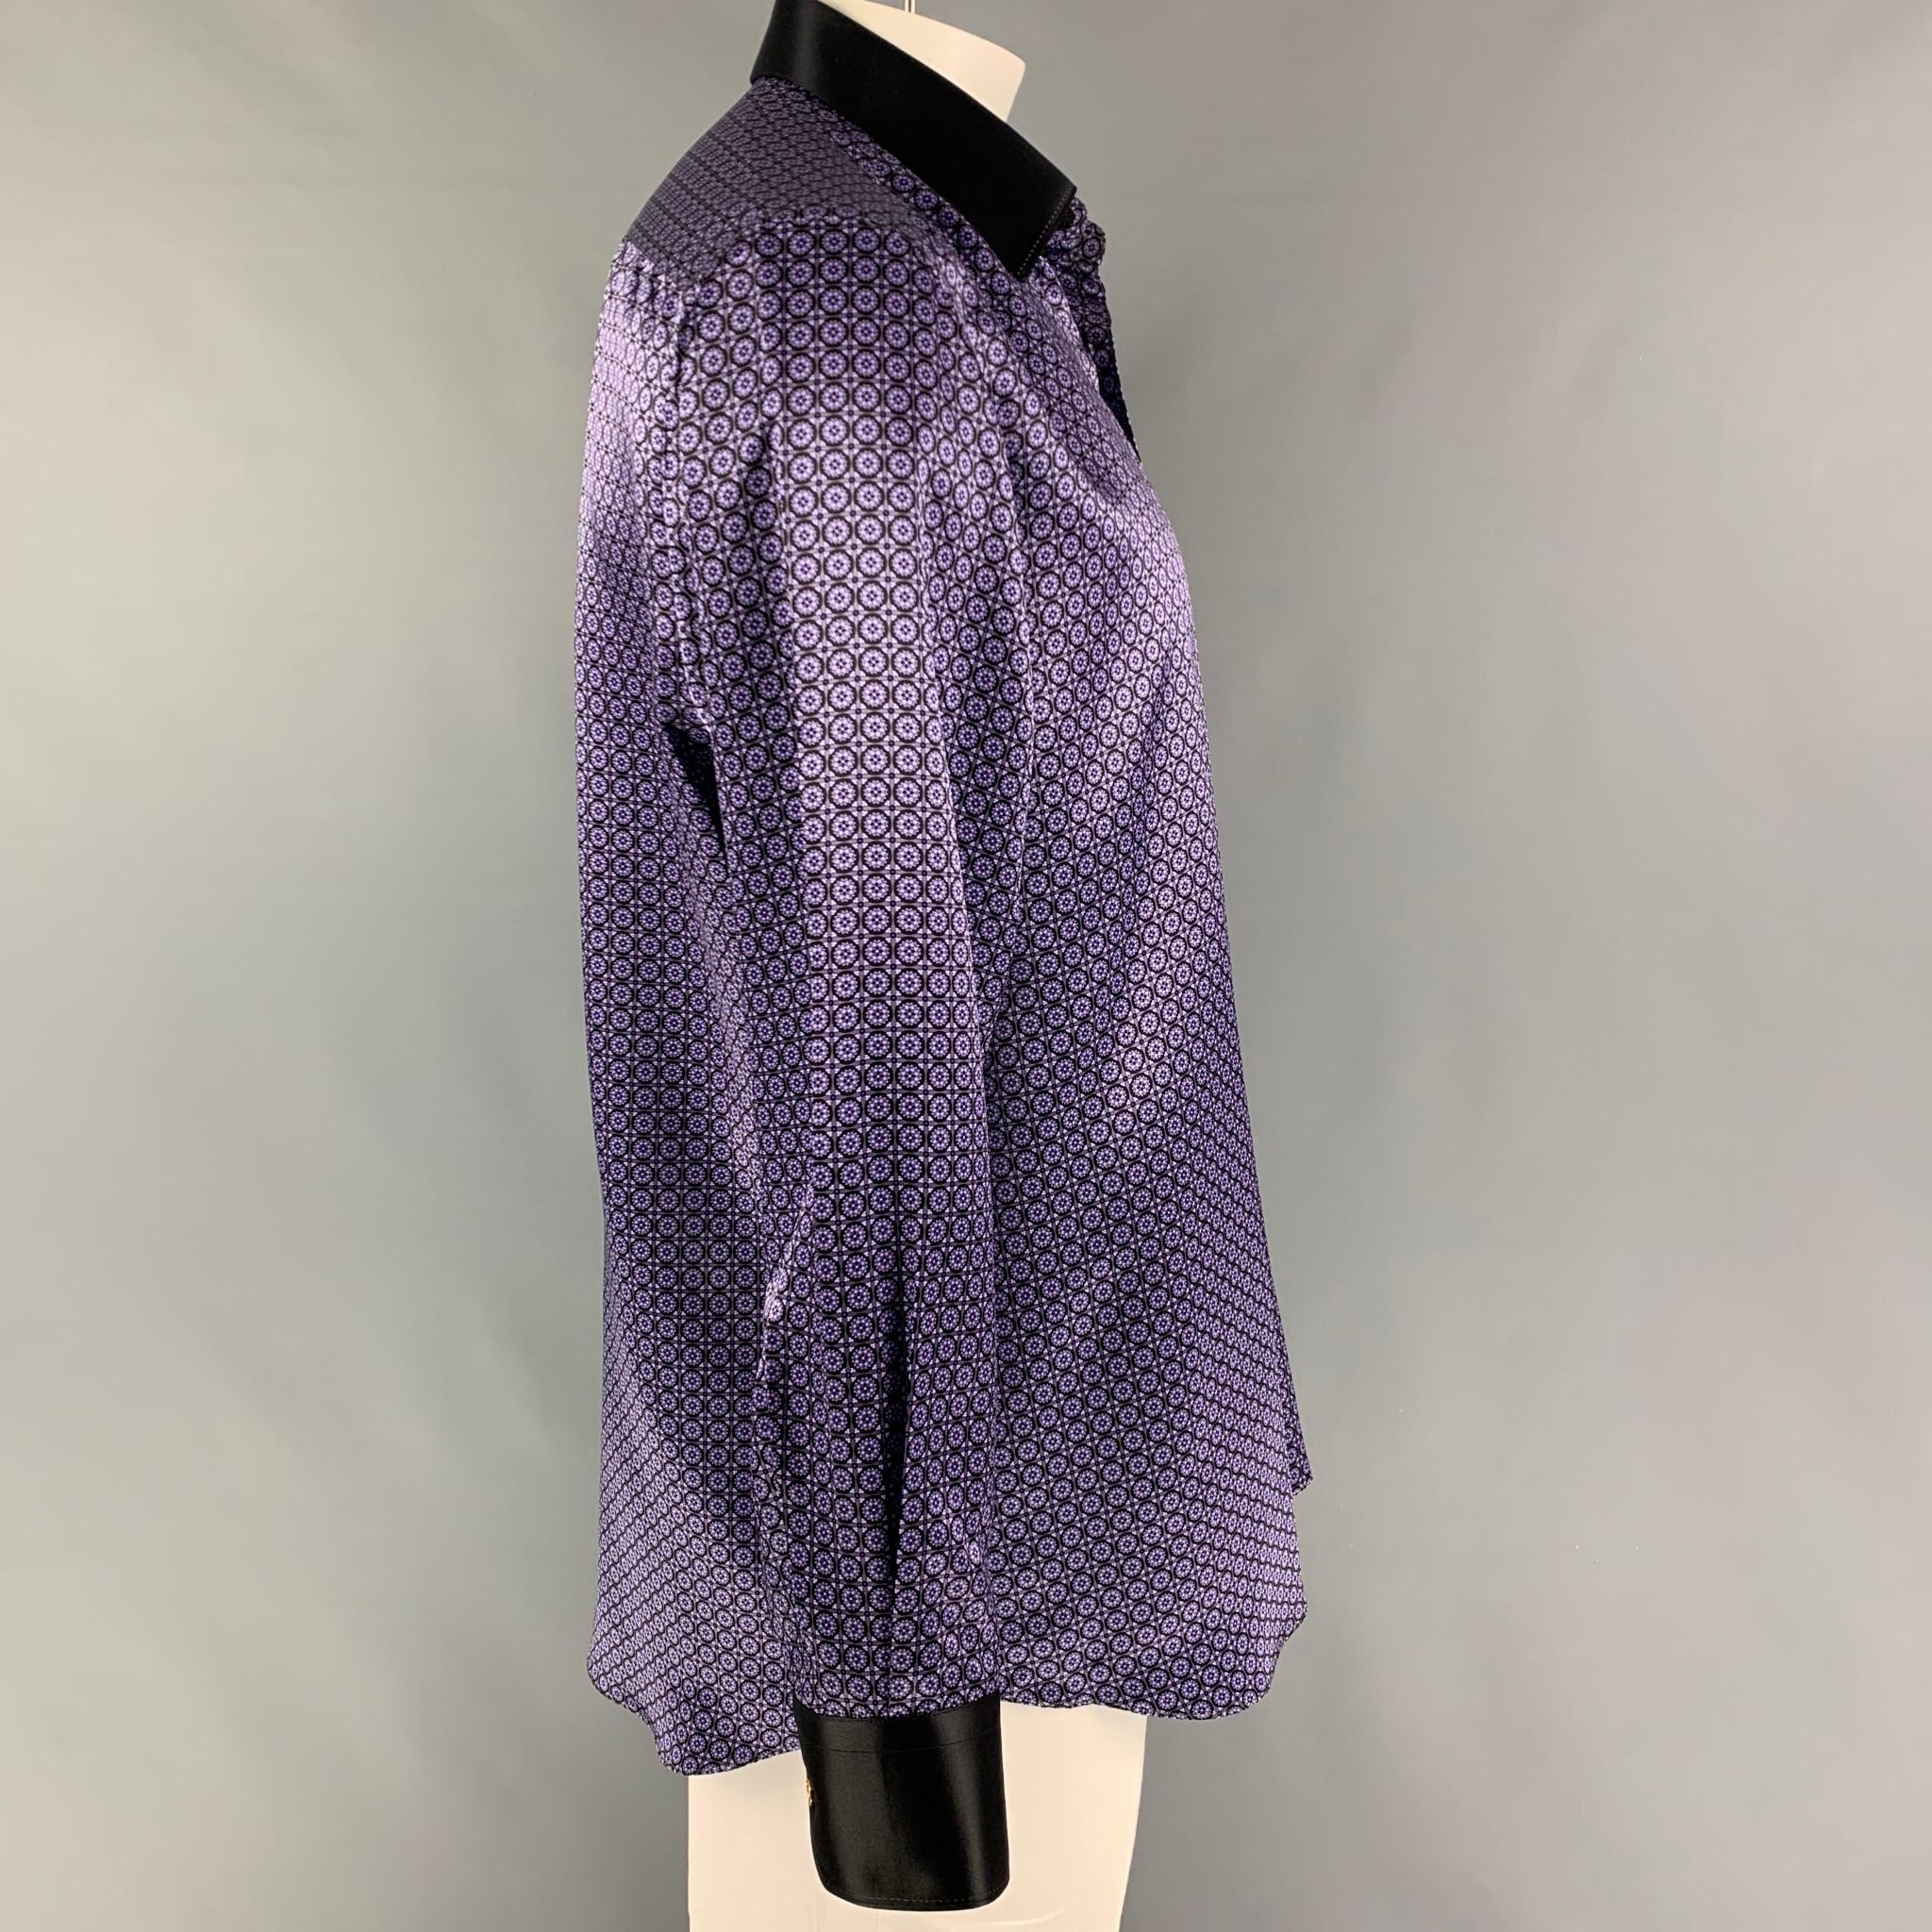 STEFANO RICCI long sleeve shirt comes in a purple & black dot print silk featuring a spread collar and a button up closure. Made in Italy. 

New With Tags.
Marked: 43/17
Original Retail Price: $1,400.00

Measurements:

Shoulder: 20 in.
Chest: 48